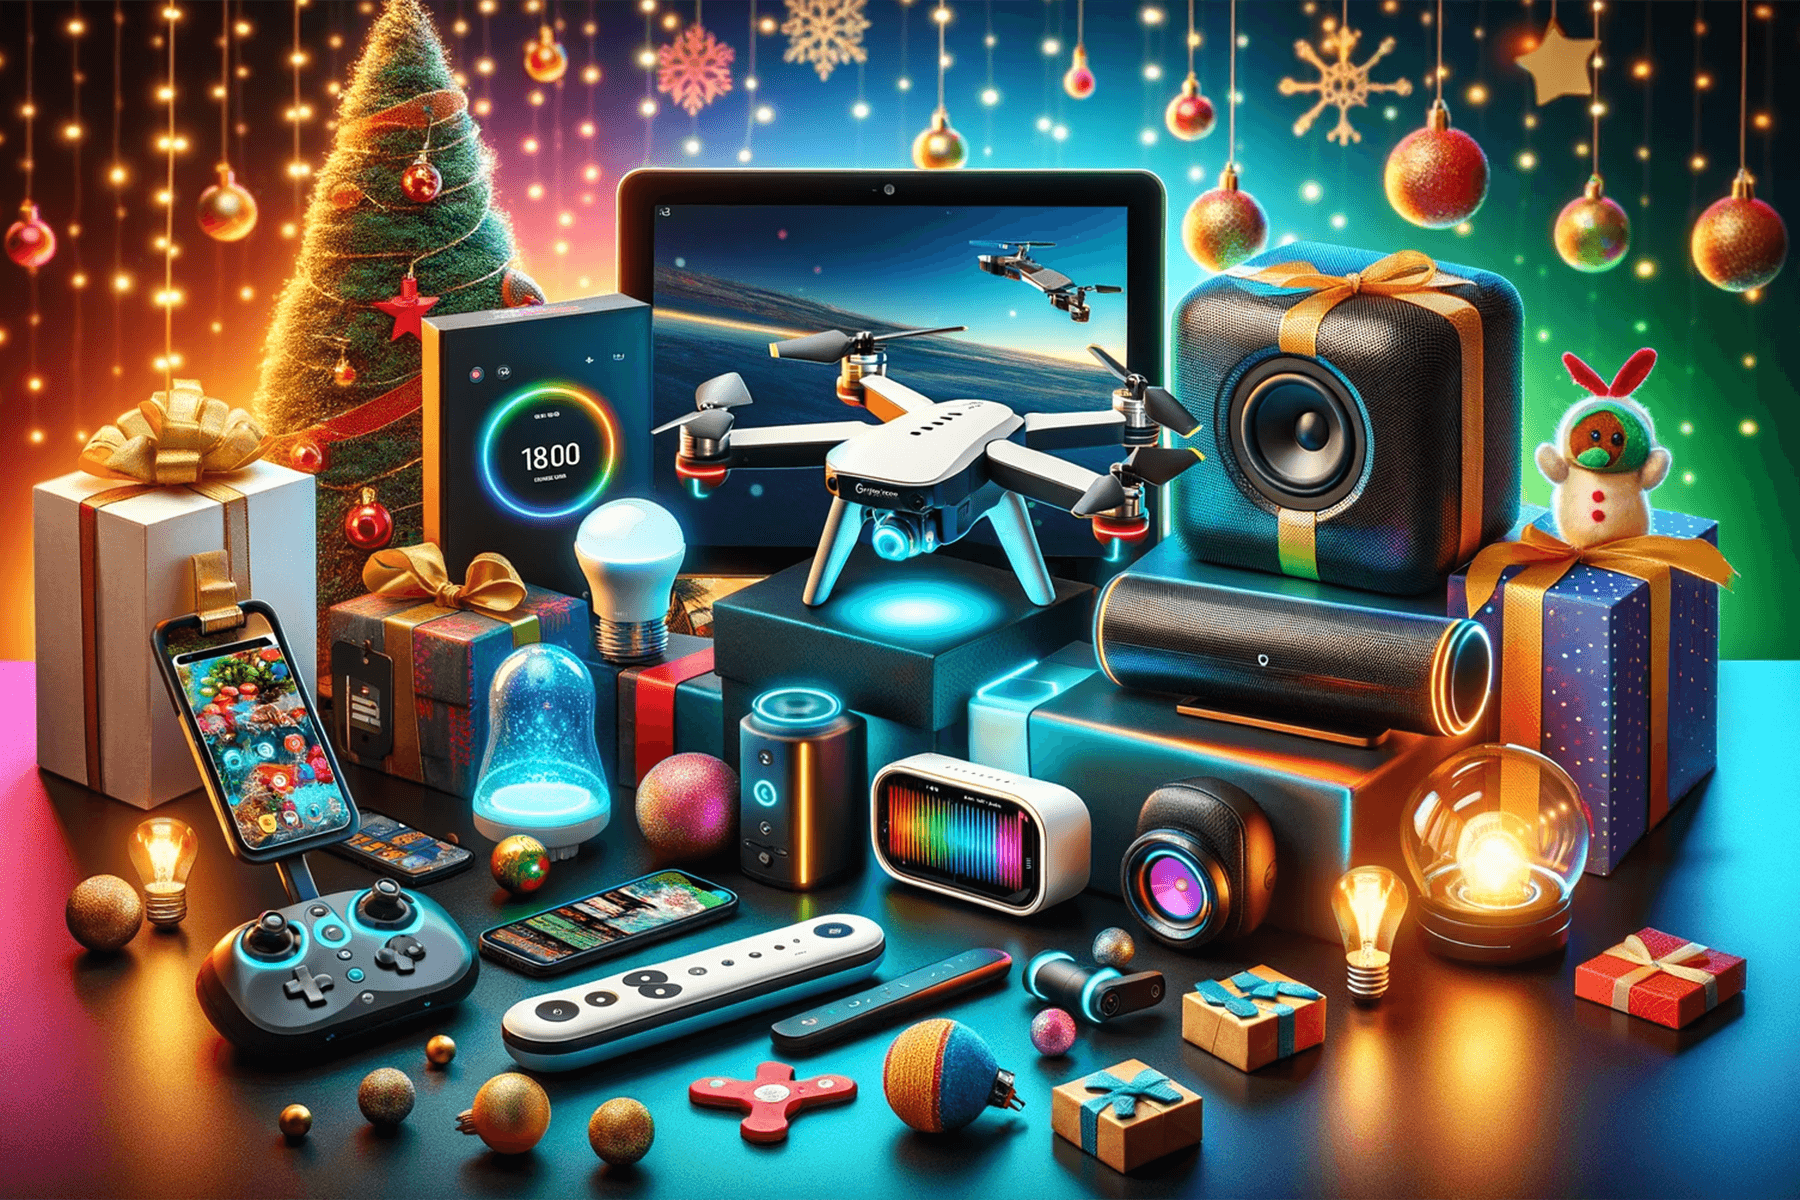 Tech Lover’s Delight: Gifts from $30 to $300 for Those Who Have Everything